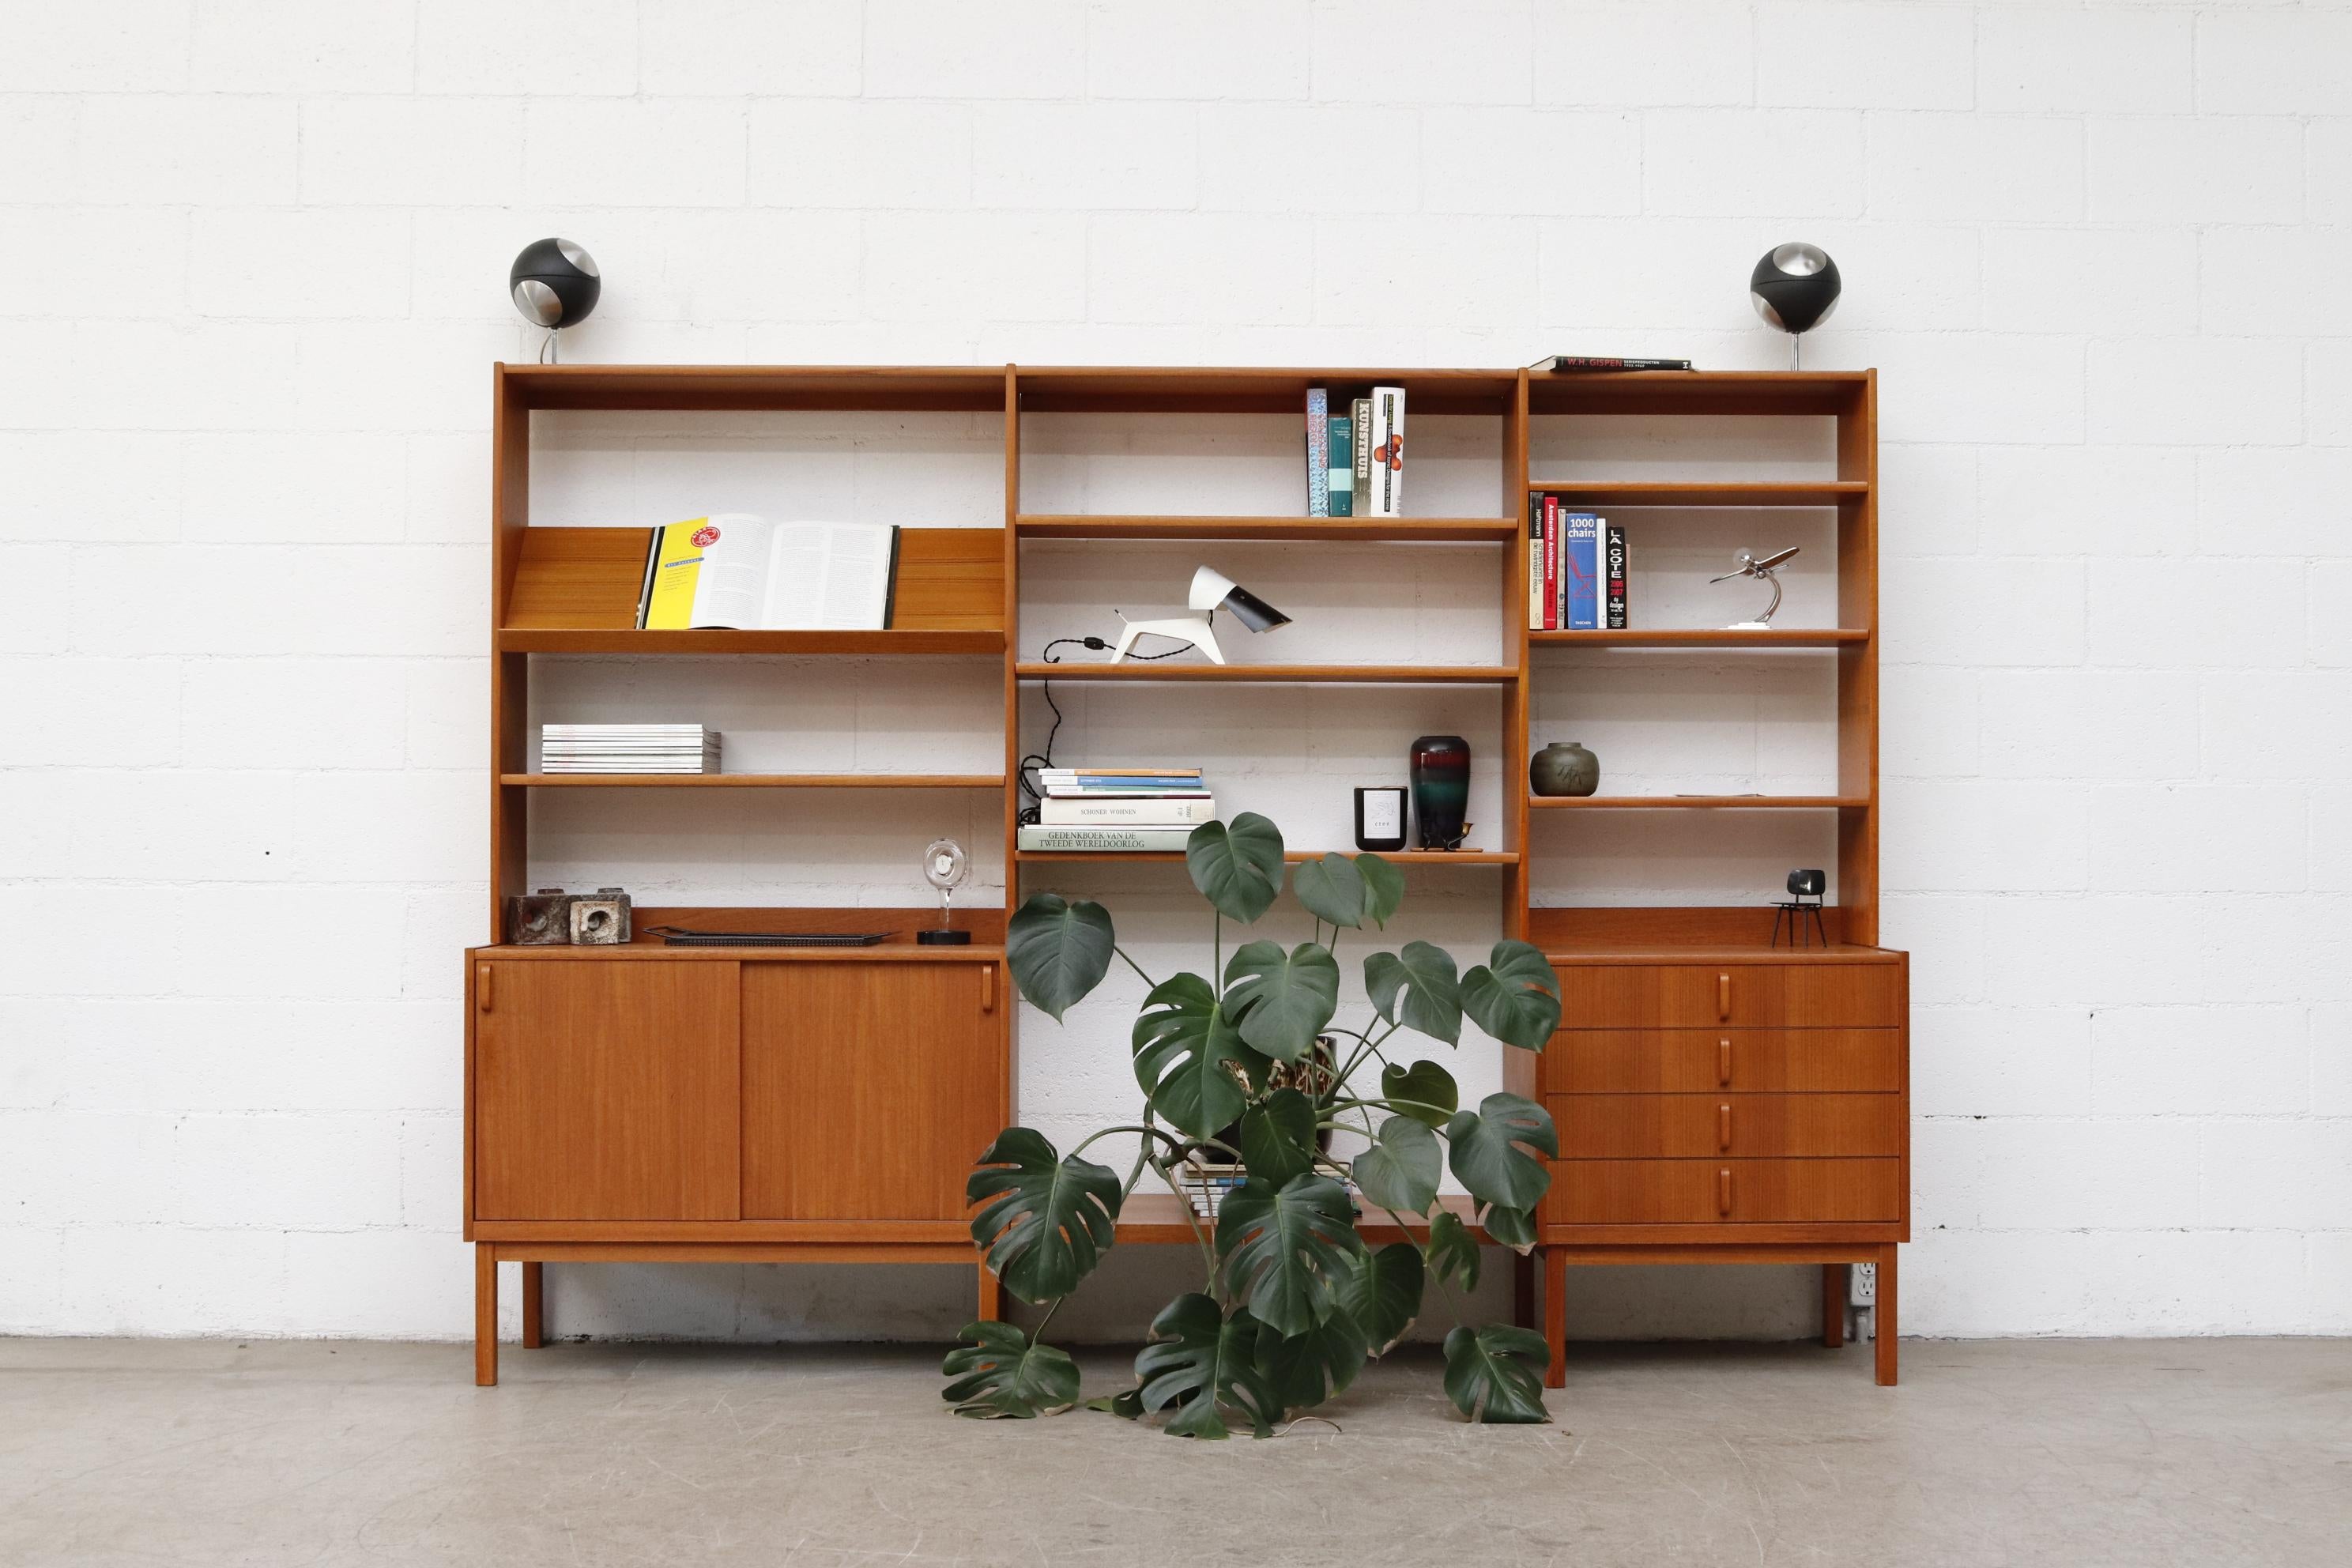 Handsome 3 section teak wall unit with 2 lower cabinets and upper shelving, signature colored interior accents. The open lower center area was for what was once used to house a television set. Perfect for large art books, ceramics, or your pet :)